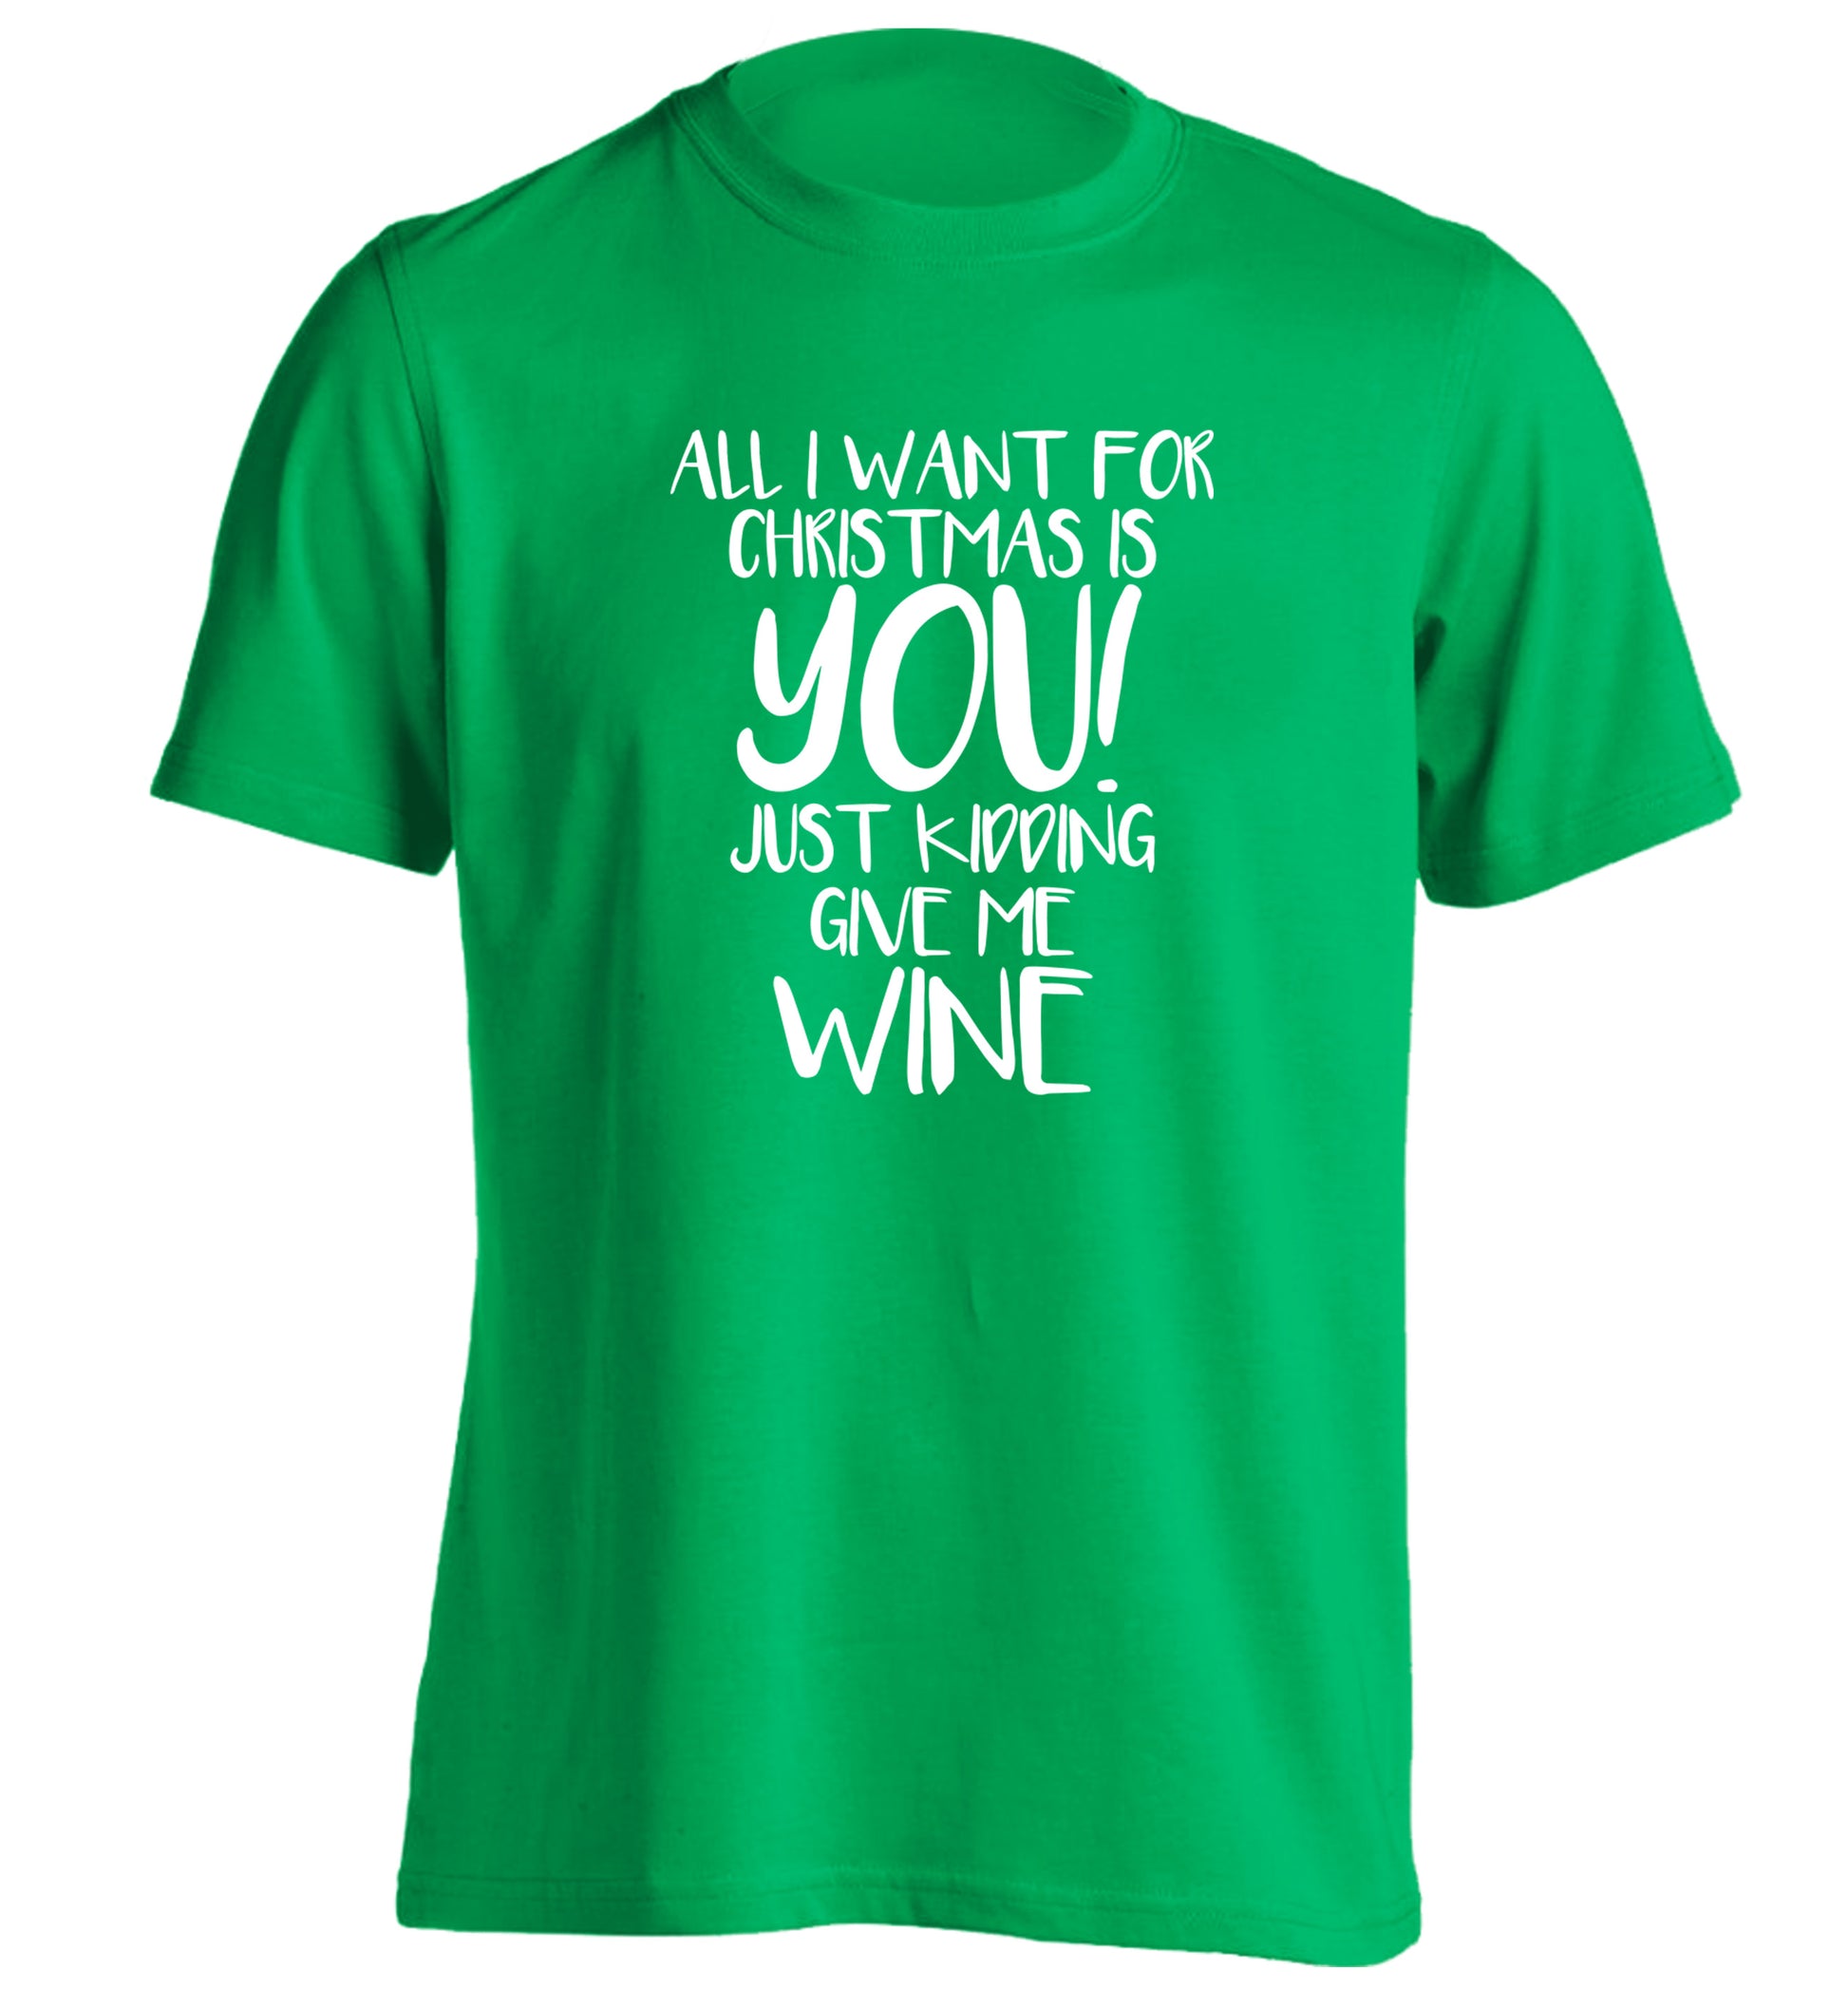 All I want for christmas is you just kidding give me the wine adults unisex green Tshirt 2XL